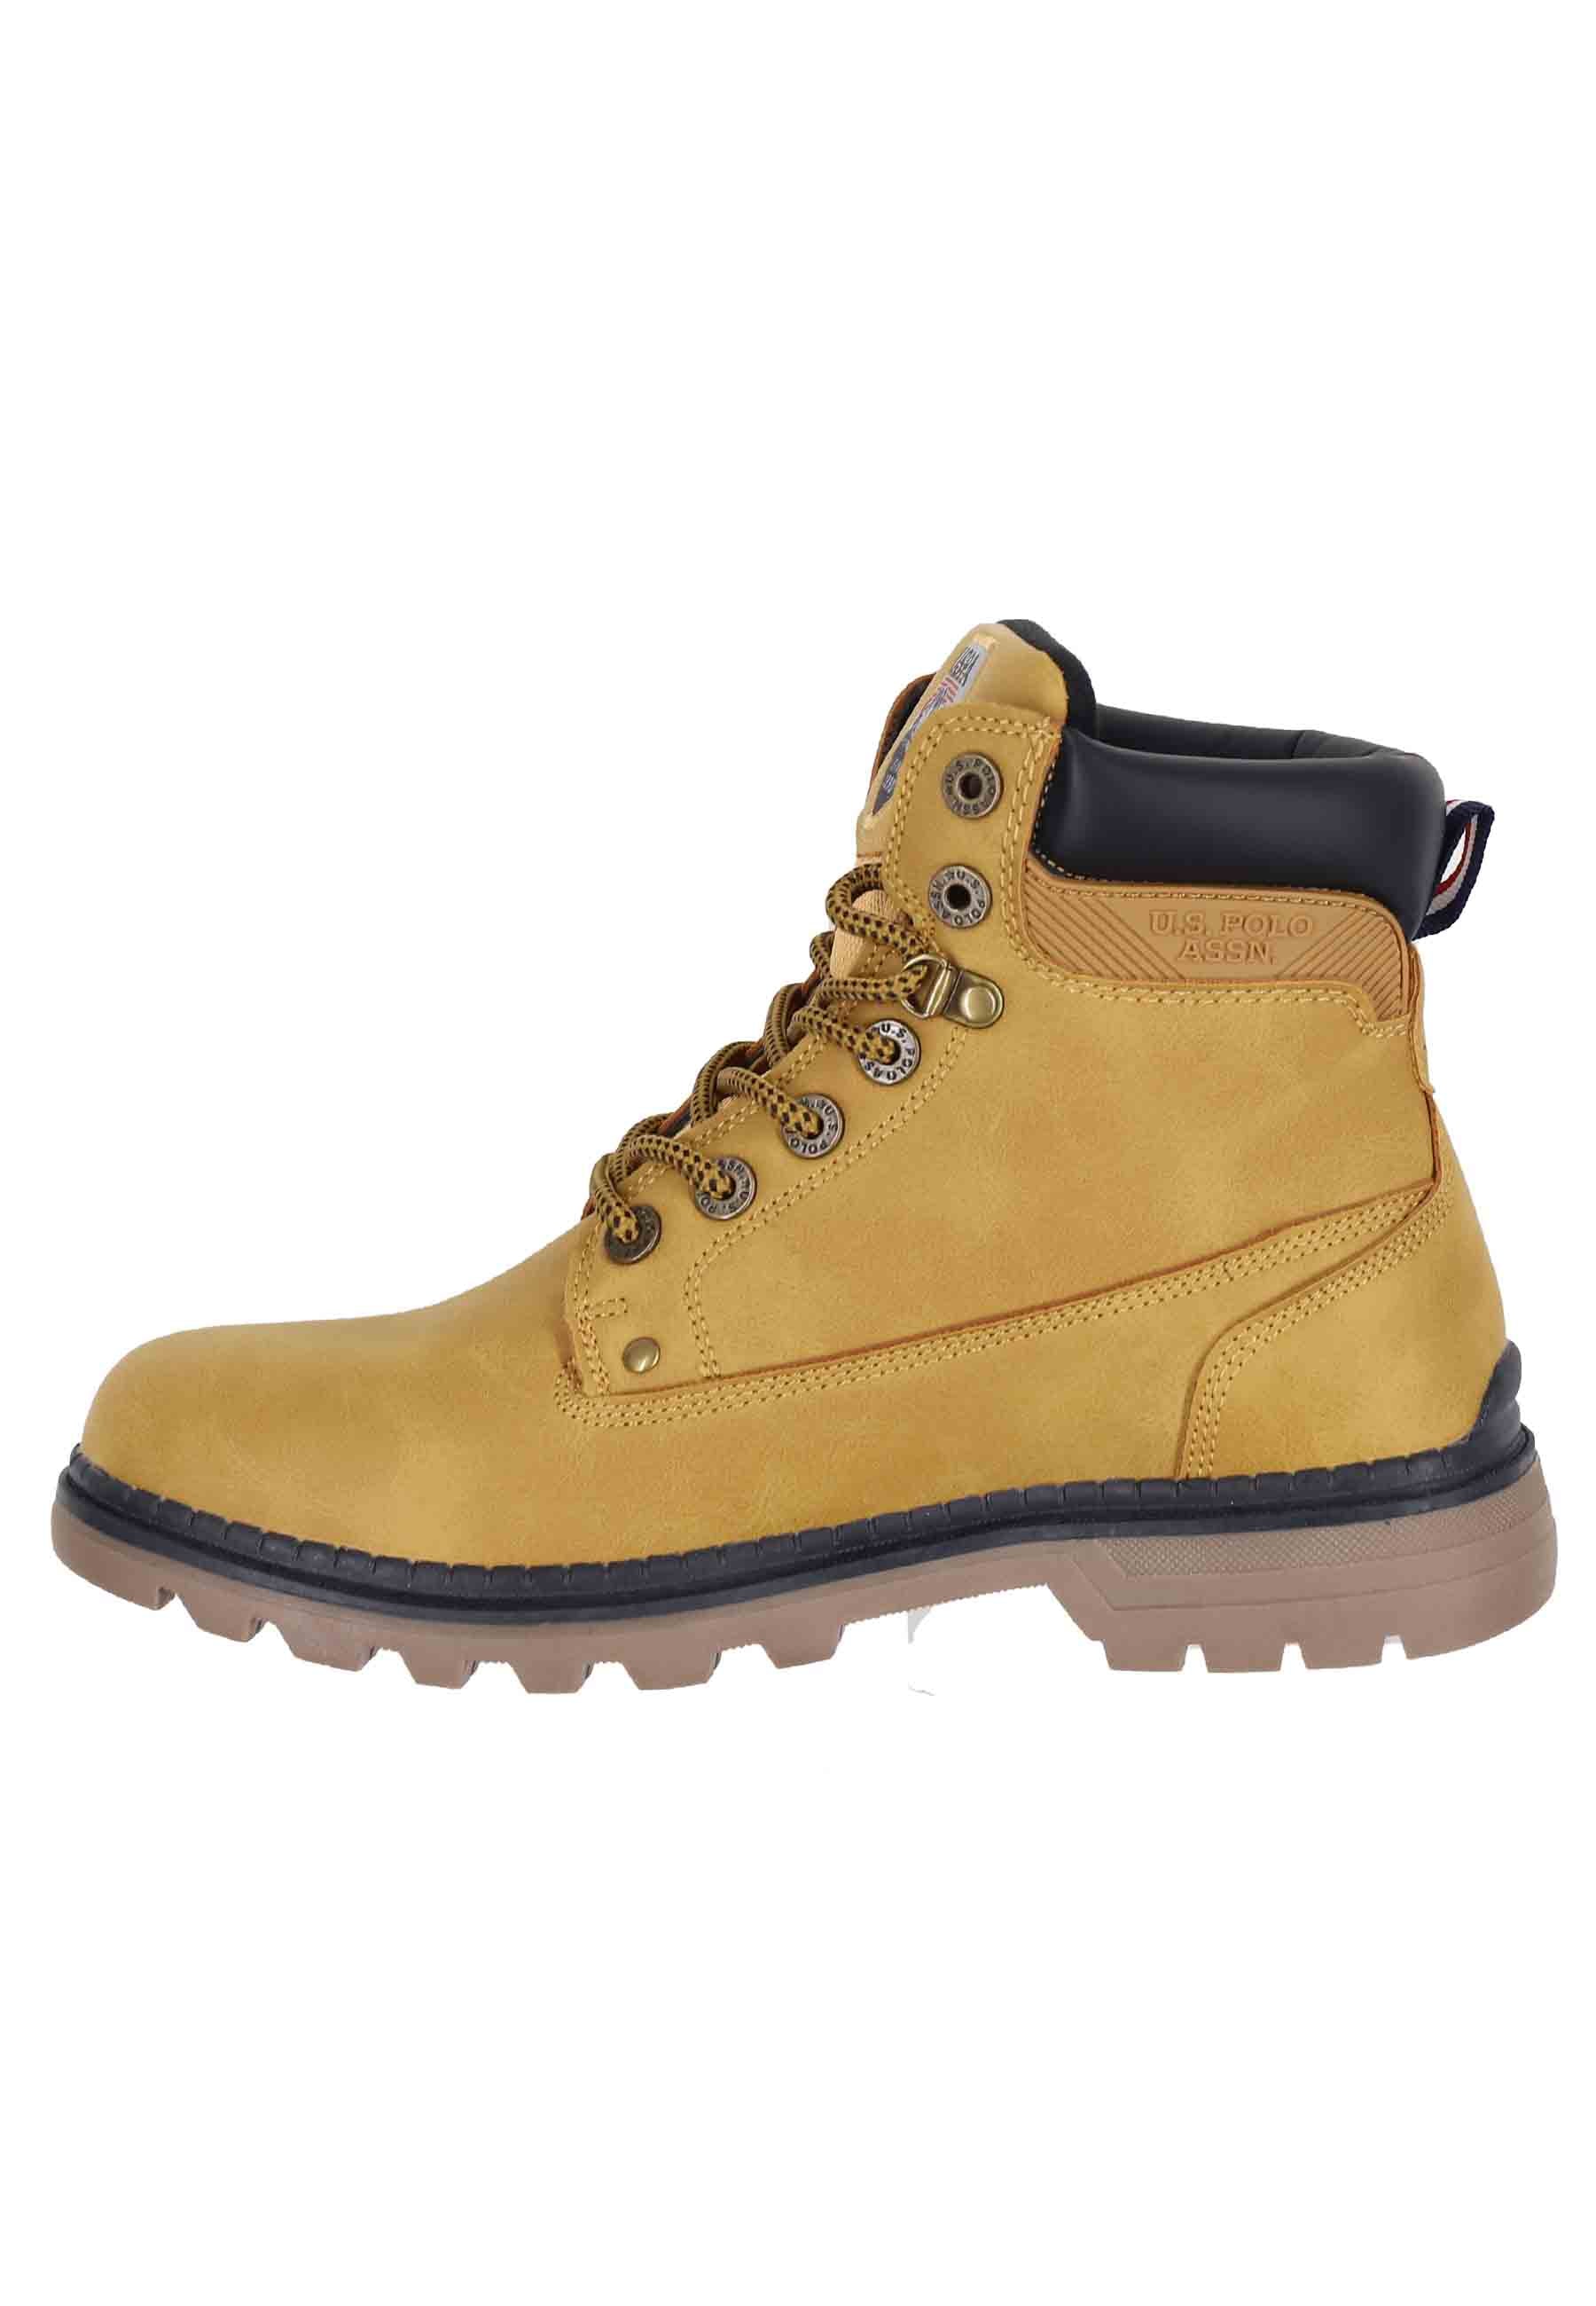 Men's amphibious ankle boots in honey eco leather with lug sole